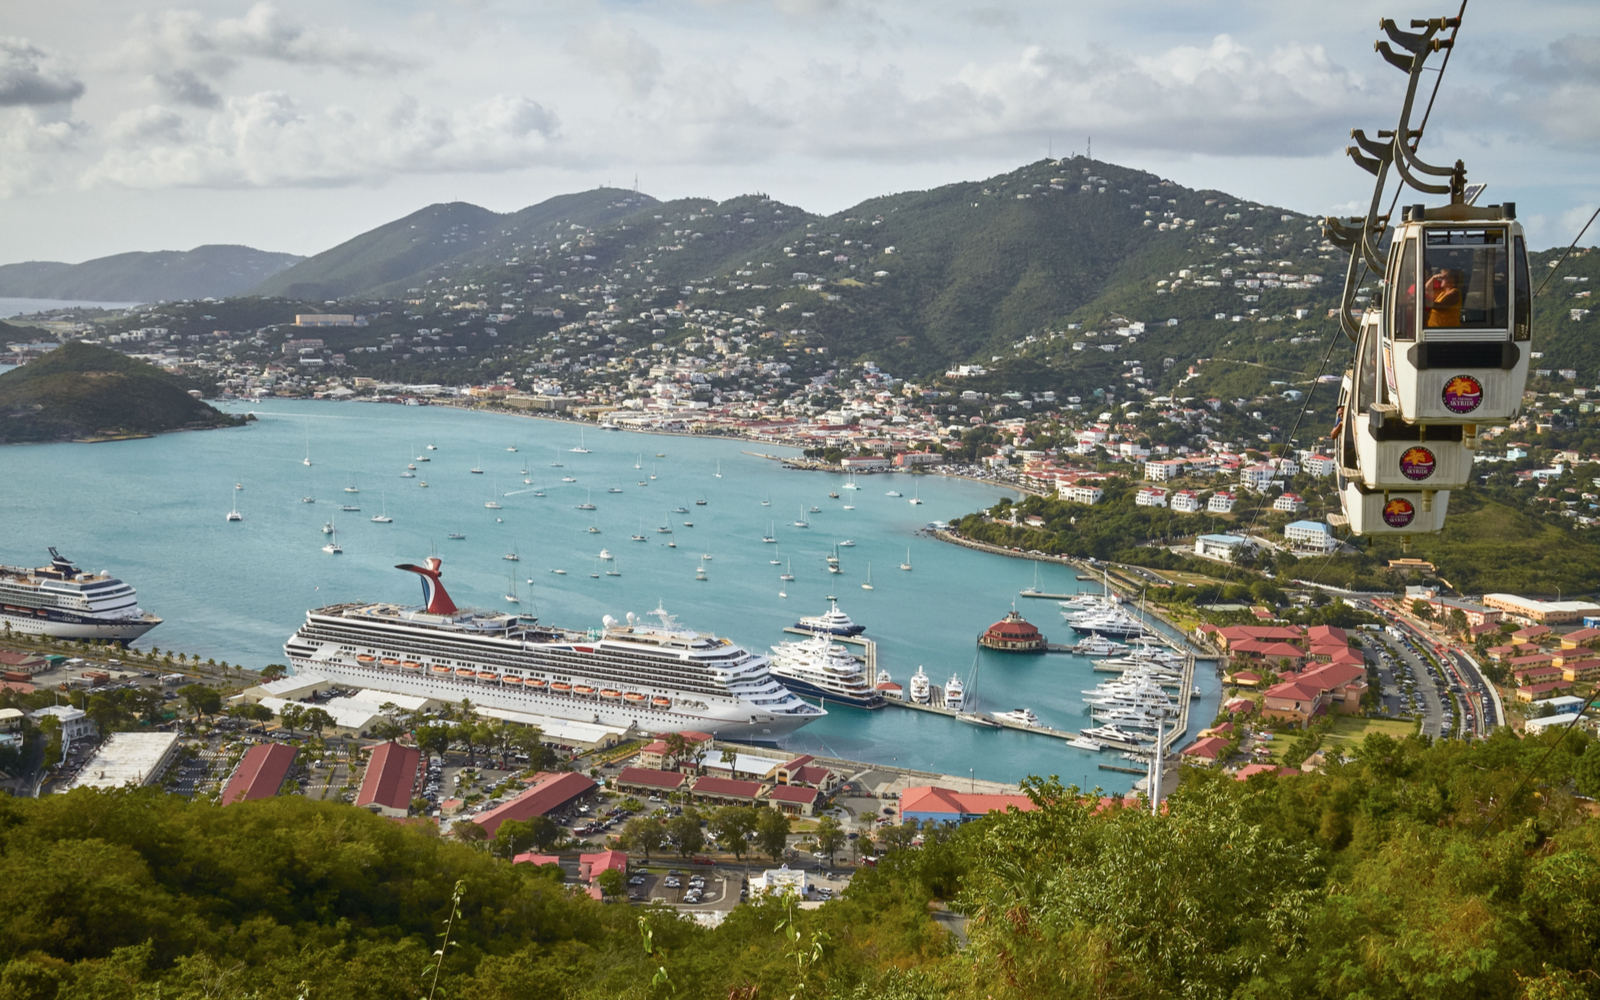 Is St. Thomas Safe? | Travel Tips & Safety Concerns